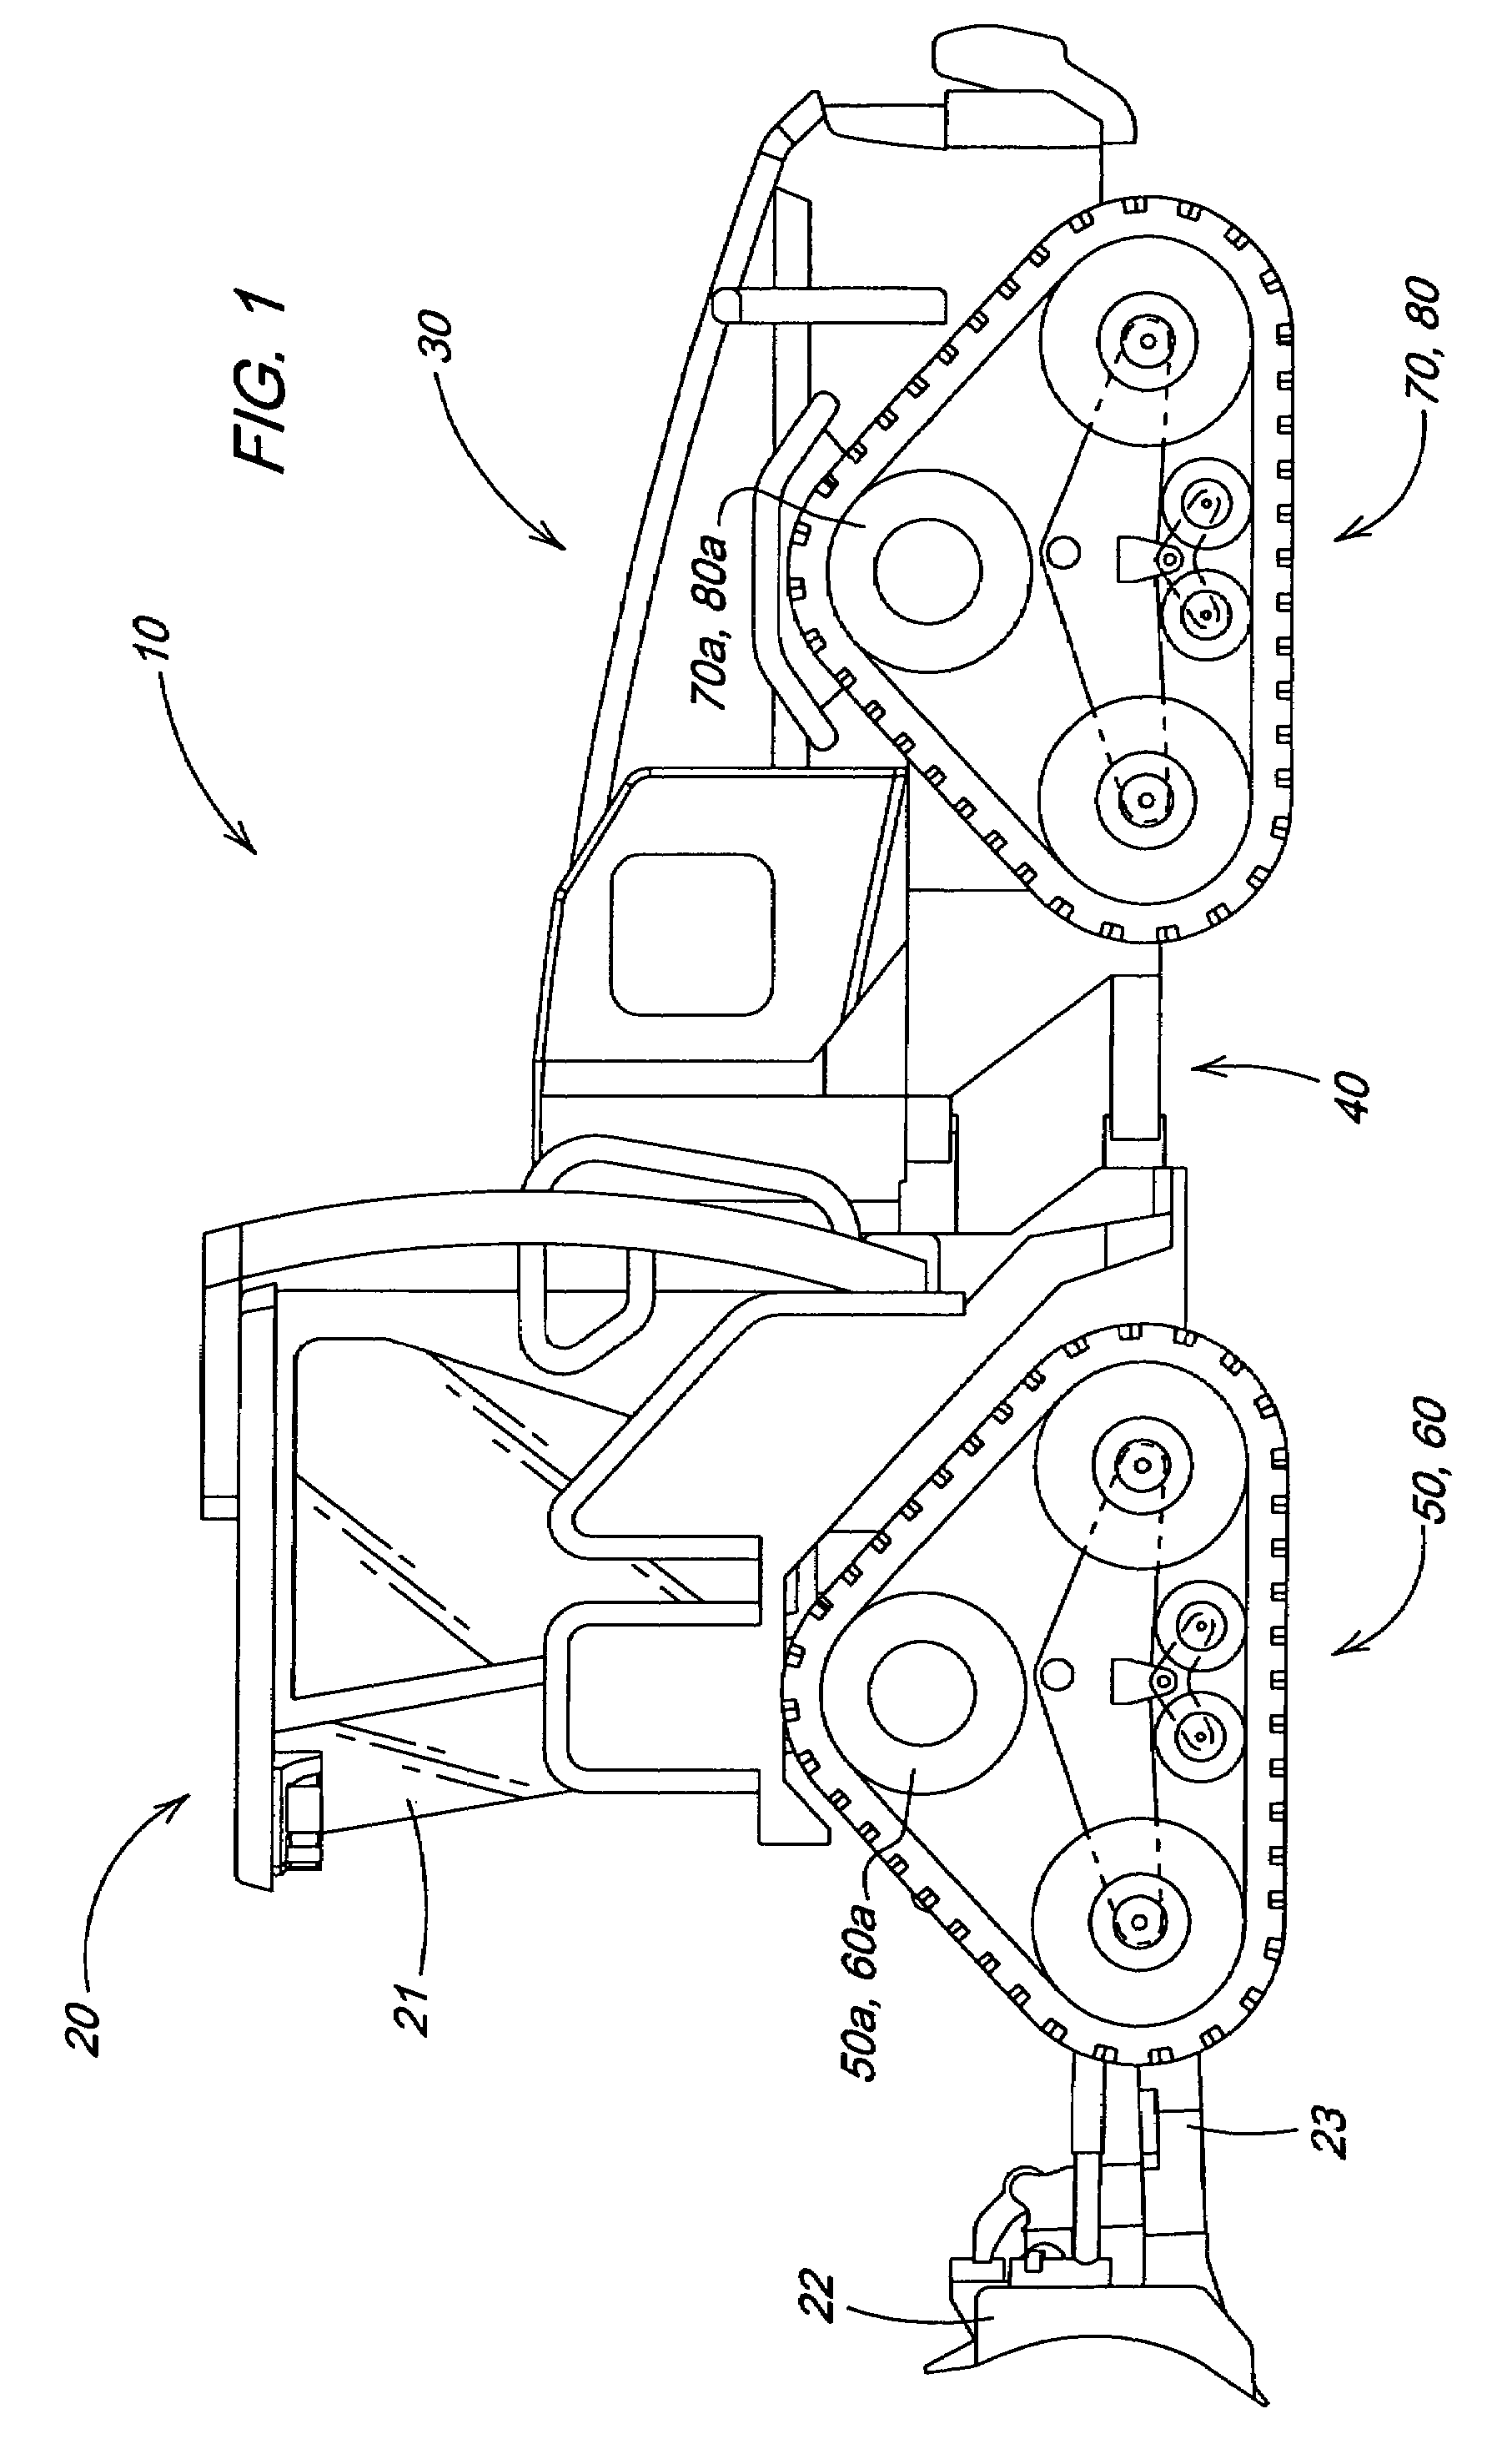 Dynamic blade distance ratio system and method